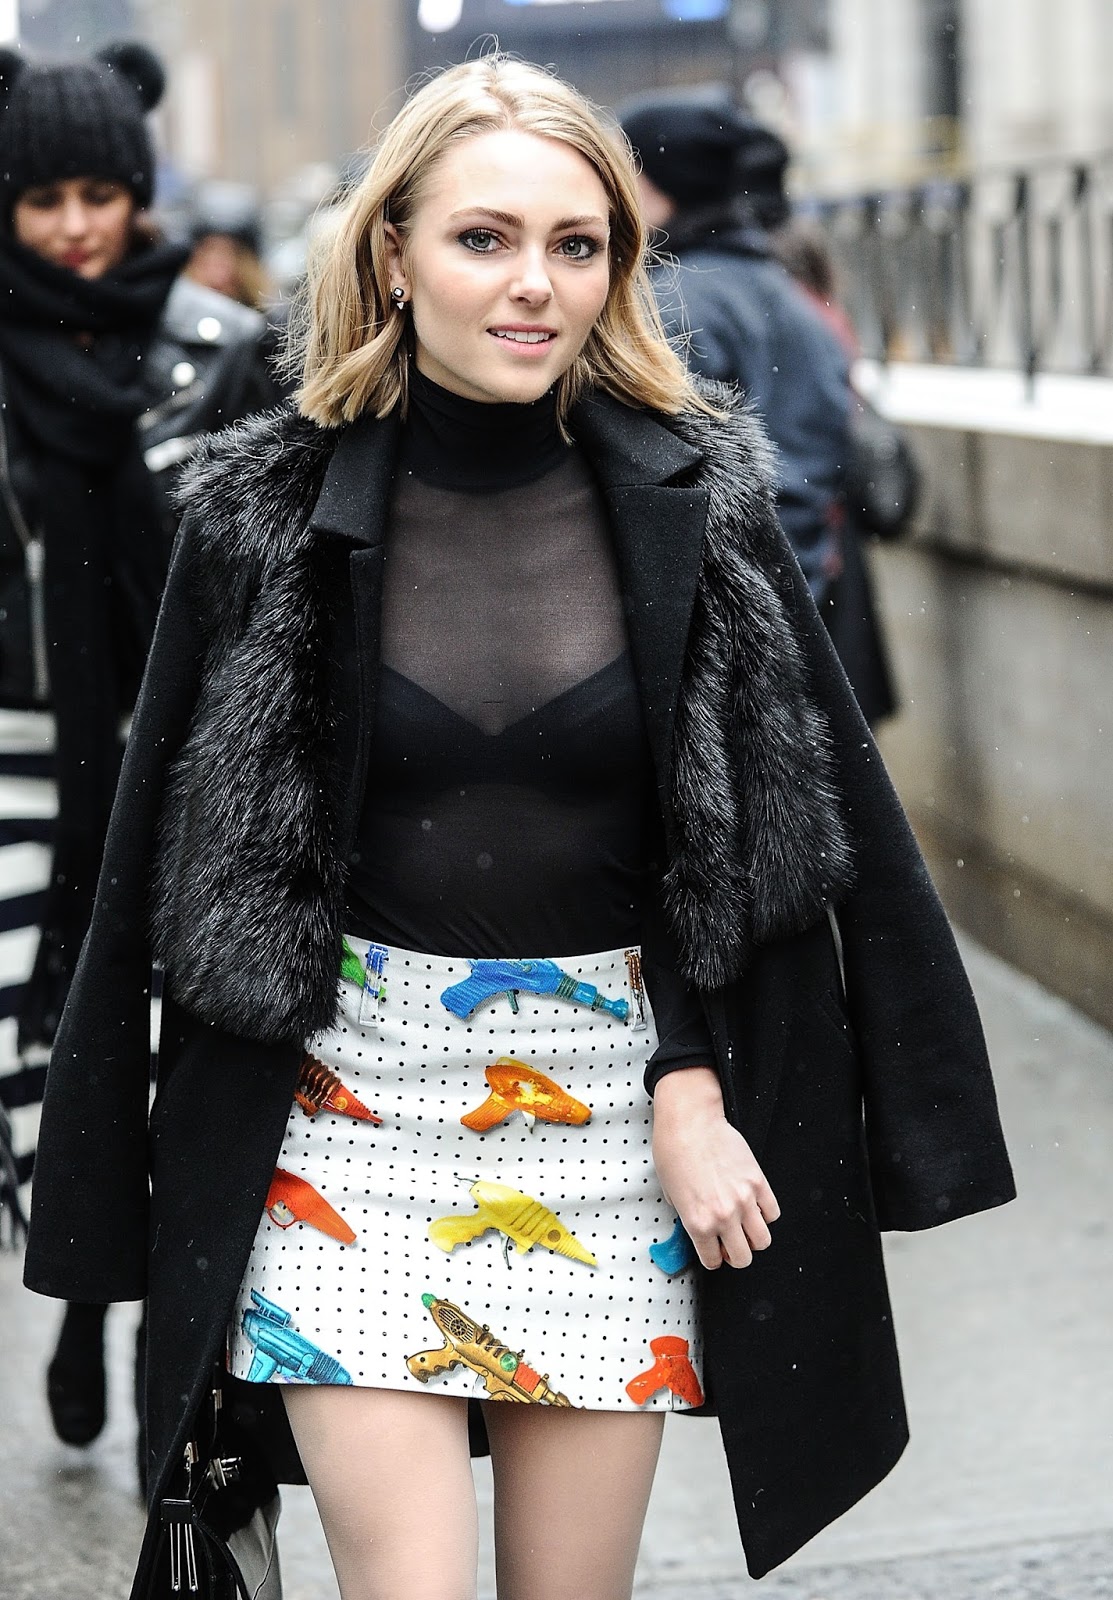 AnnaSophia Robb out in New York City after the fashion show, February 15,  2016. - Fashionmylegs : The tights and hosiery blog